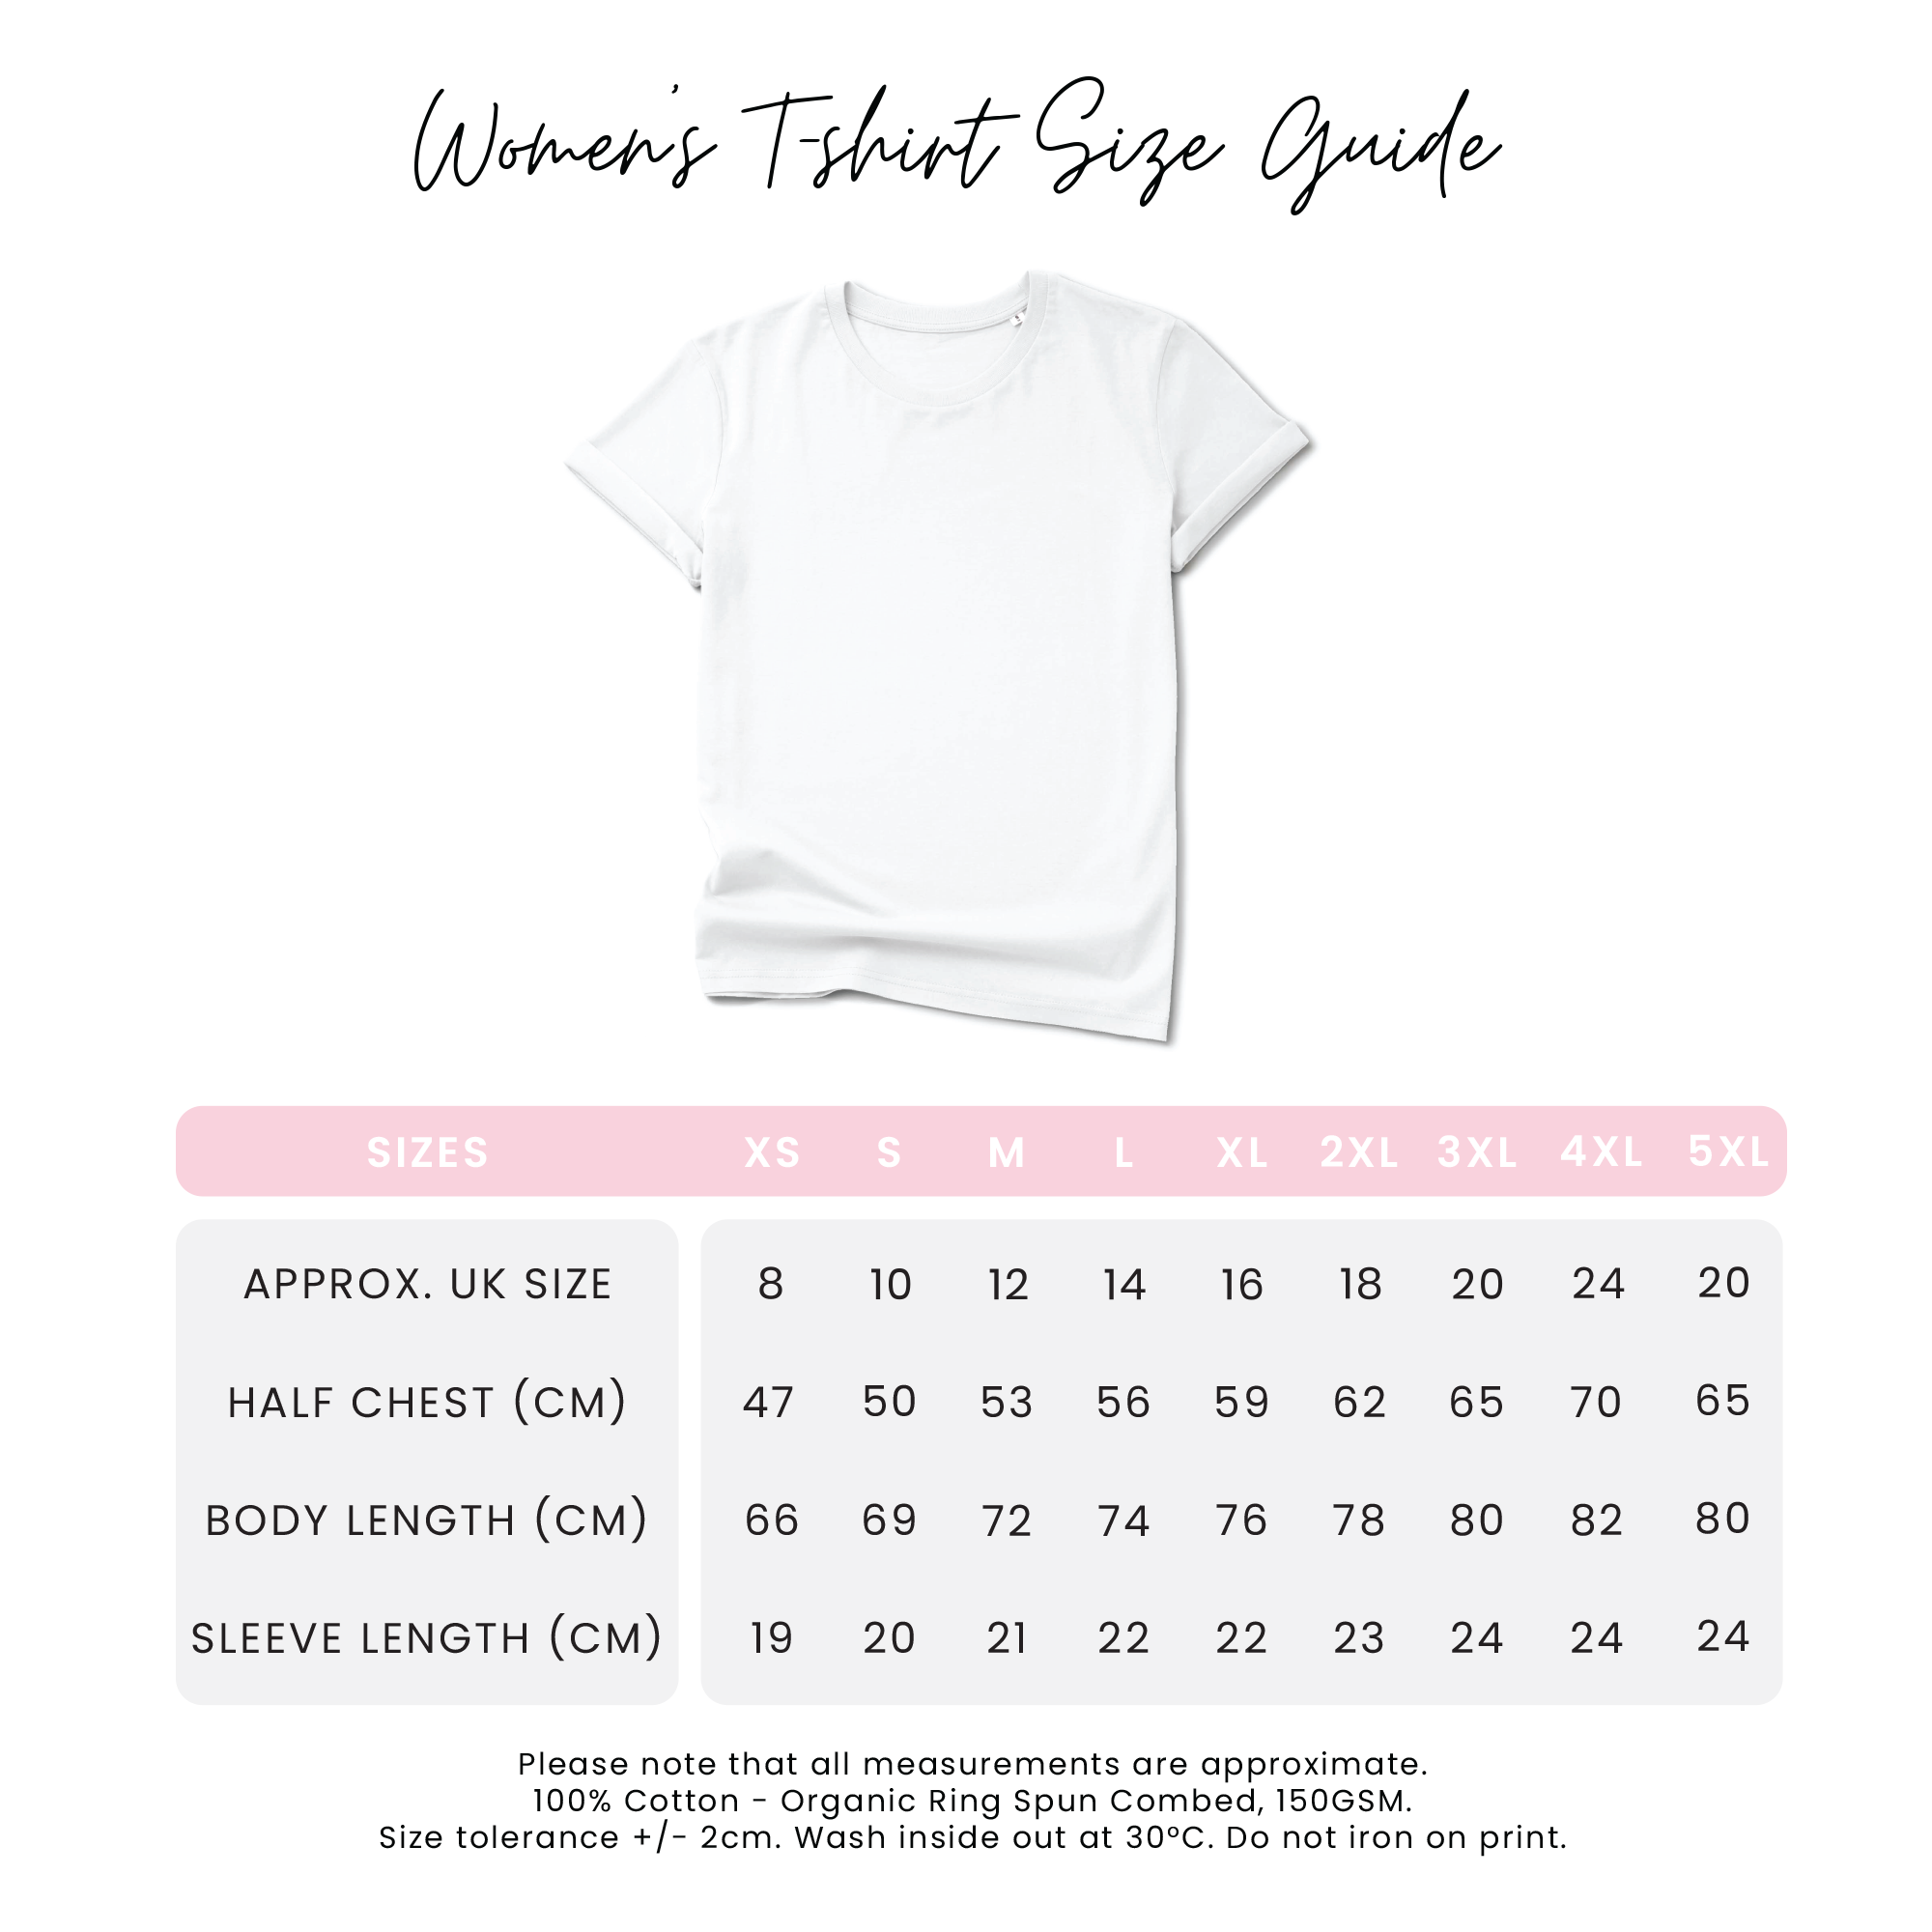 Bride Tribe Personalised Metallic Gold Hen Party T-Shirt